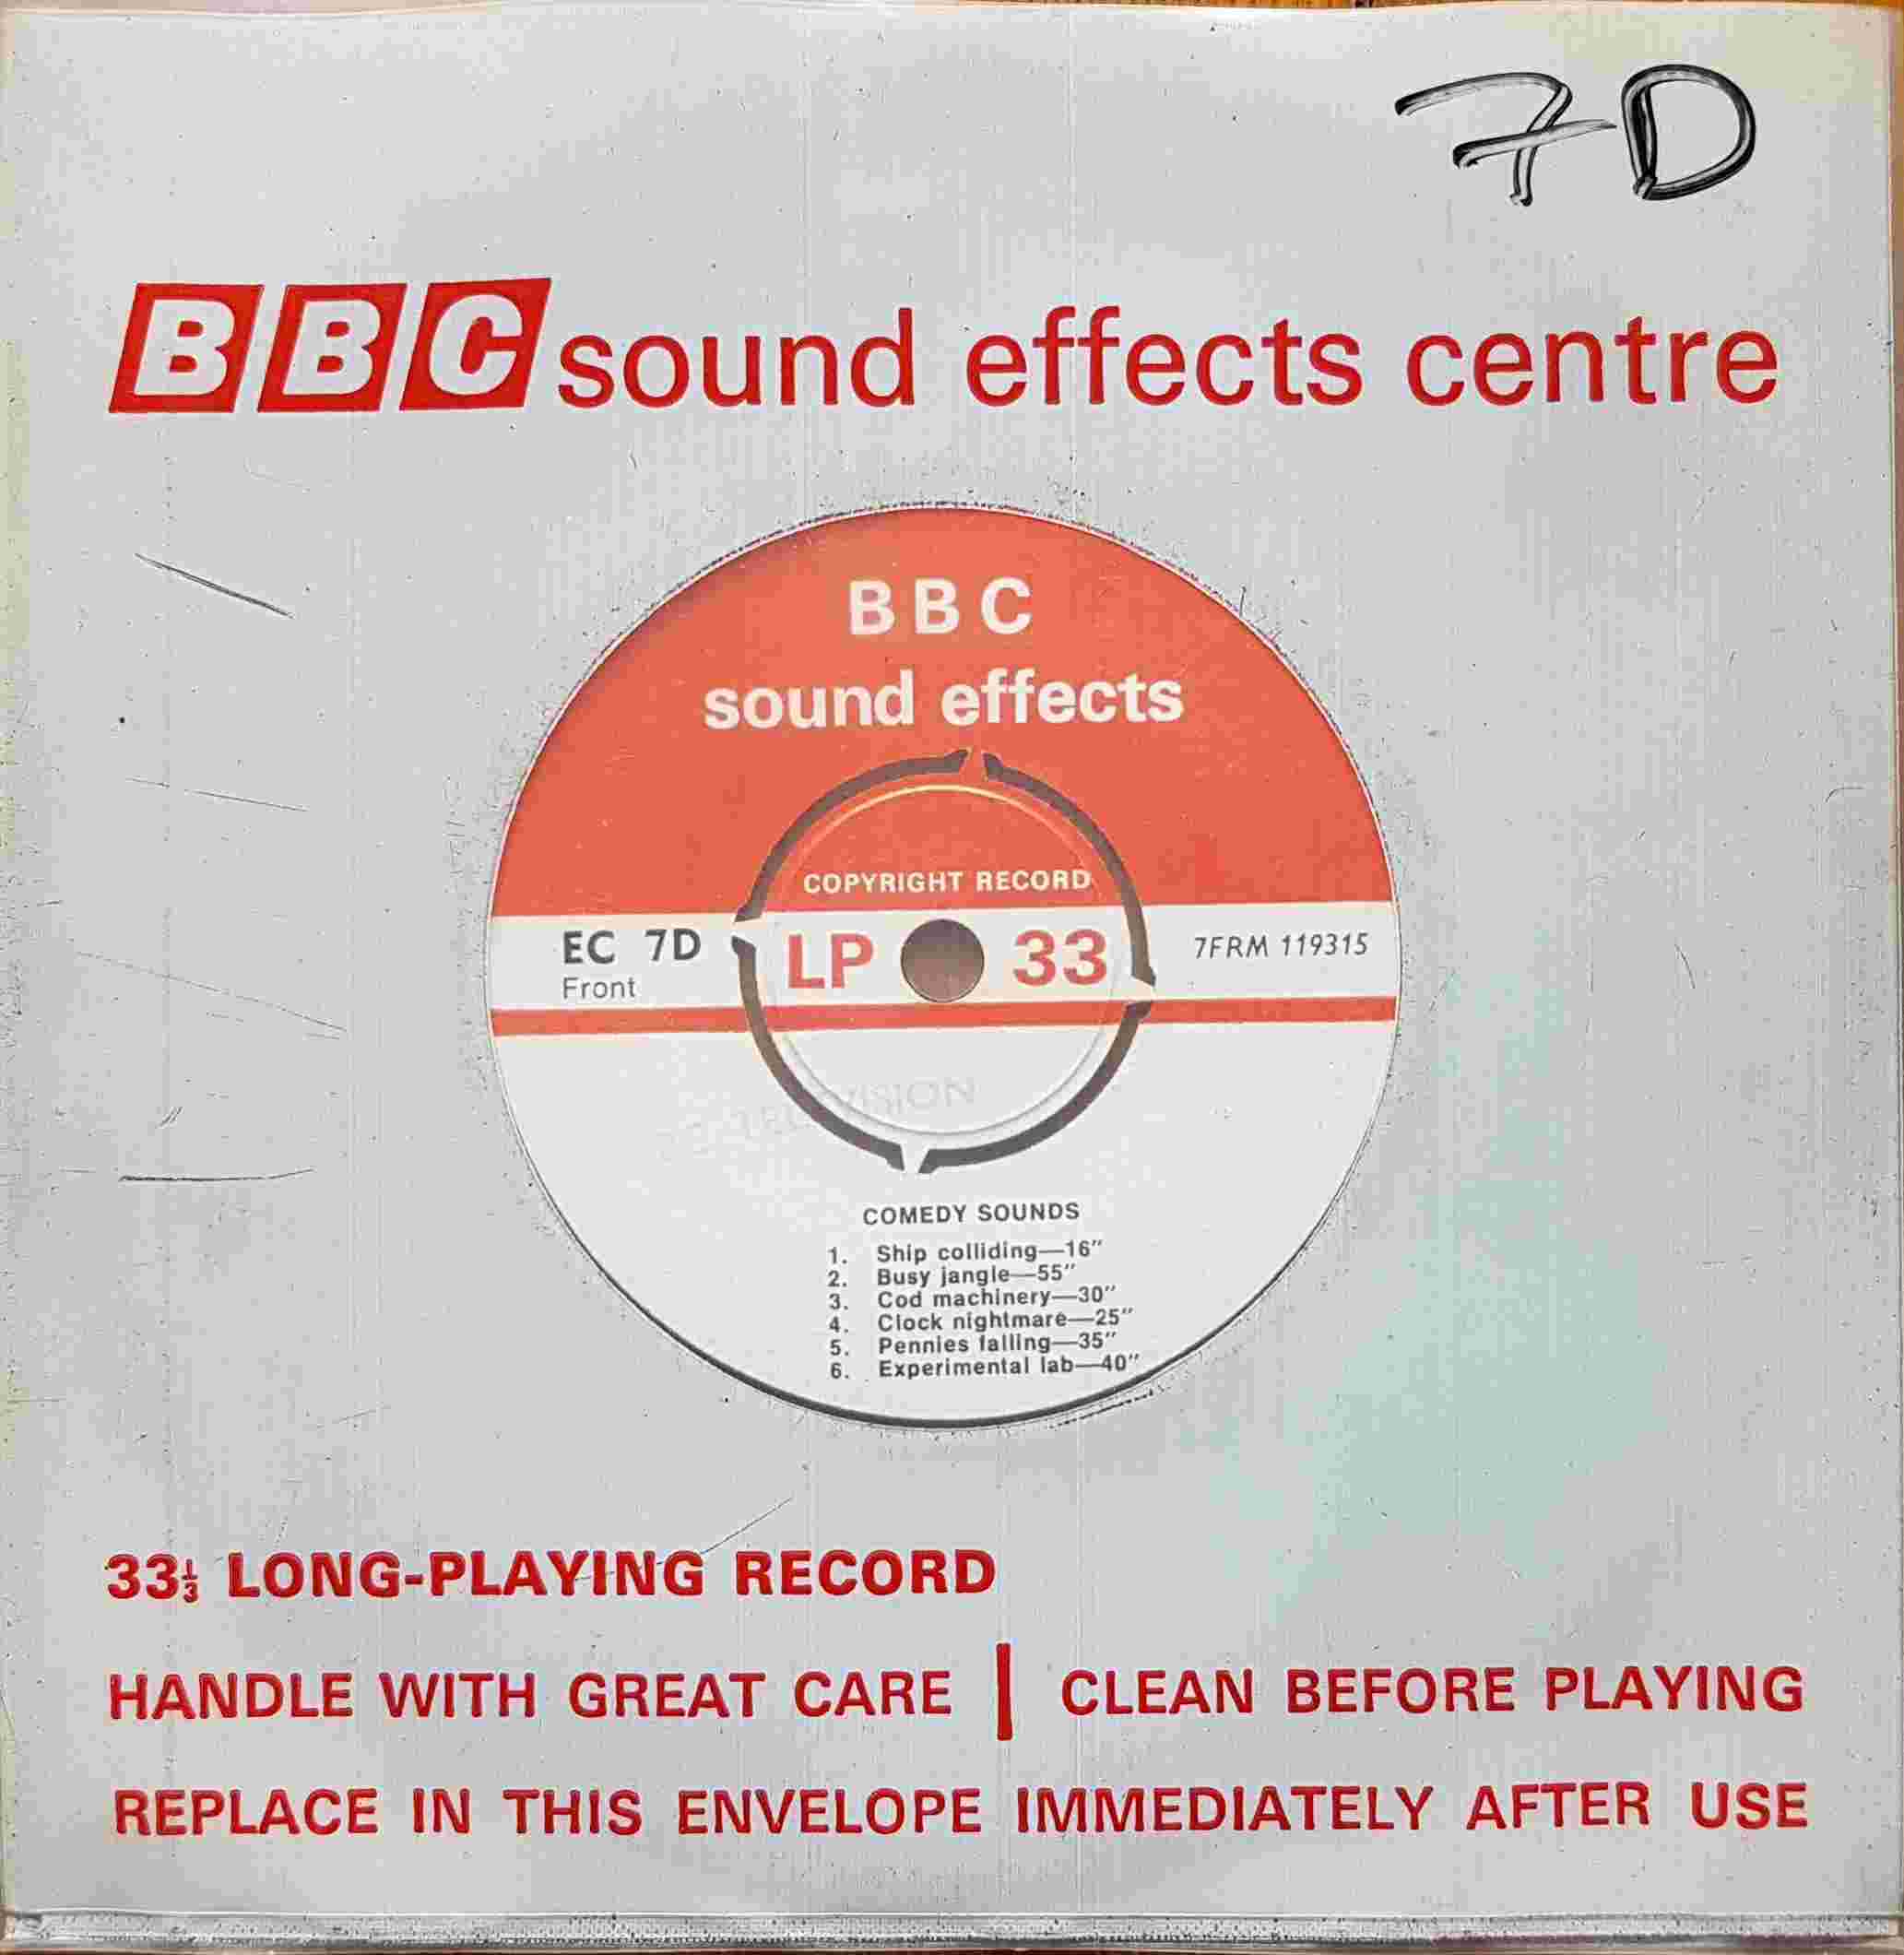 Picture of EC 7D Comedy sounds by artist Not registered from the BBC singles - Records and Tapes library